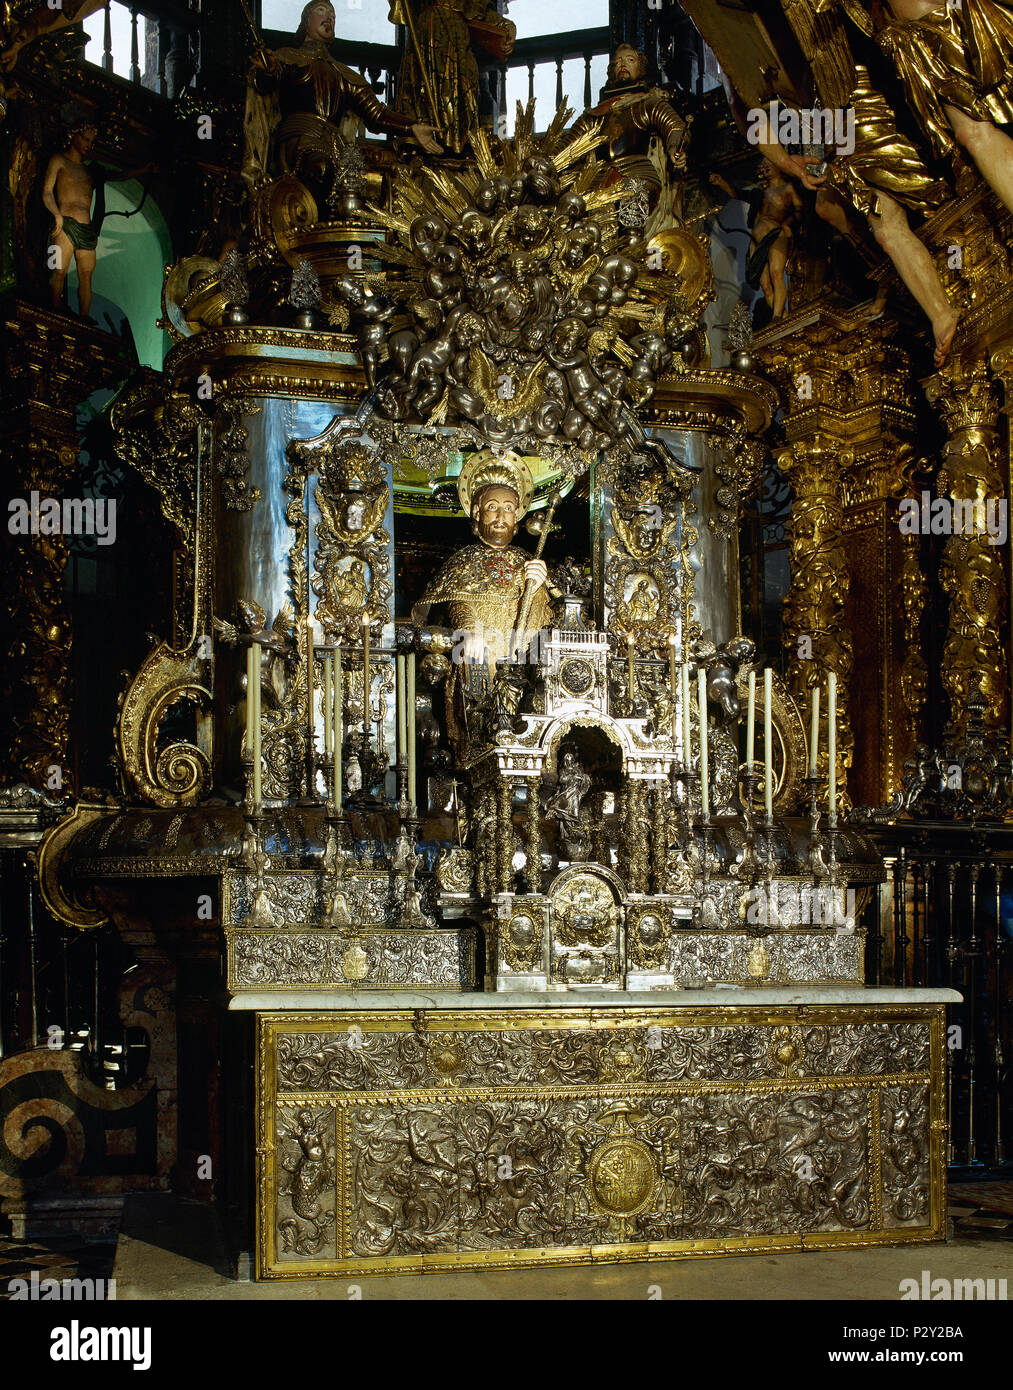 Main altar of the Cathedral of Santiago de Compostela. A bejeweled medieval stone statue of St. James (12th century). Remodeled, sitting on a silver chair and covered by a silver enclosure. Santiago de Compostela Cathedral. Santiago de Compostela, Province of La Coruña, Galicia, Spain. Stock Photo